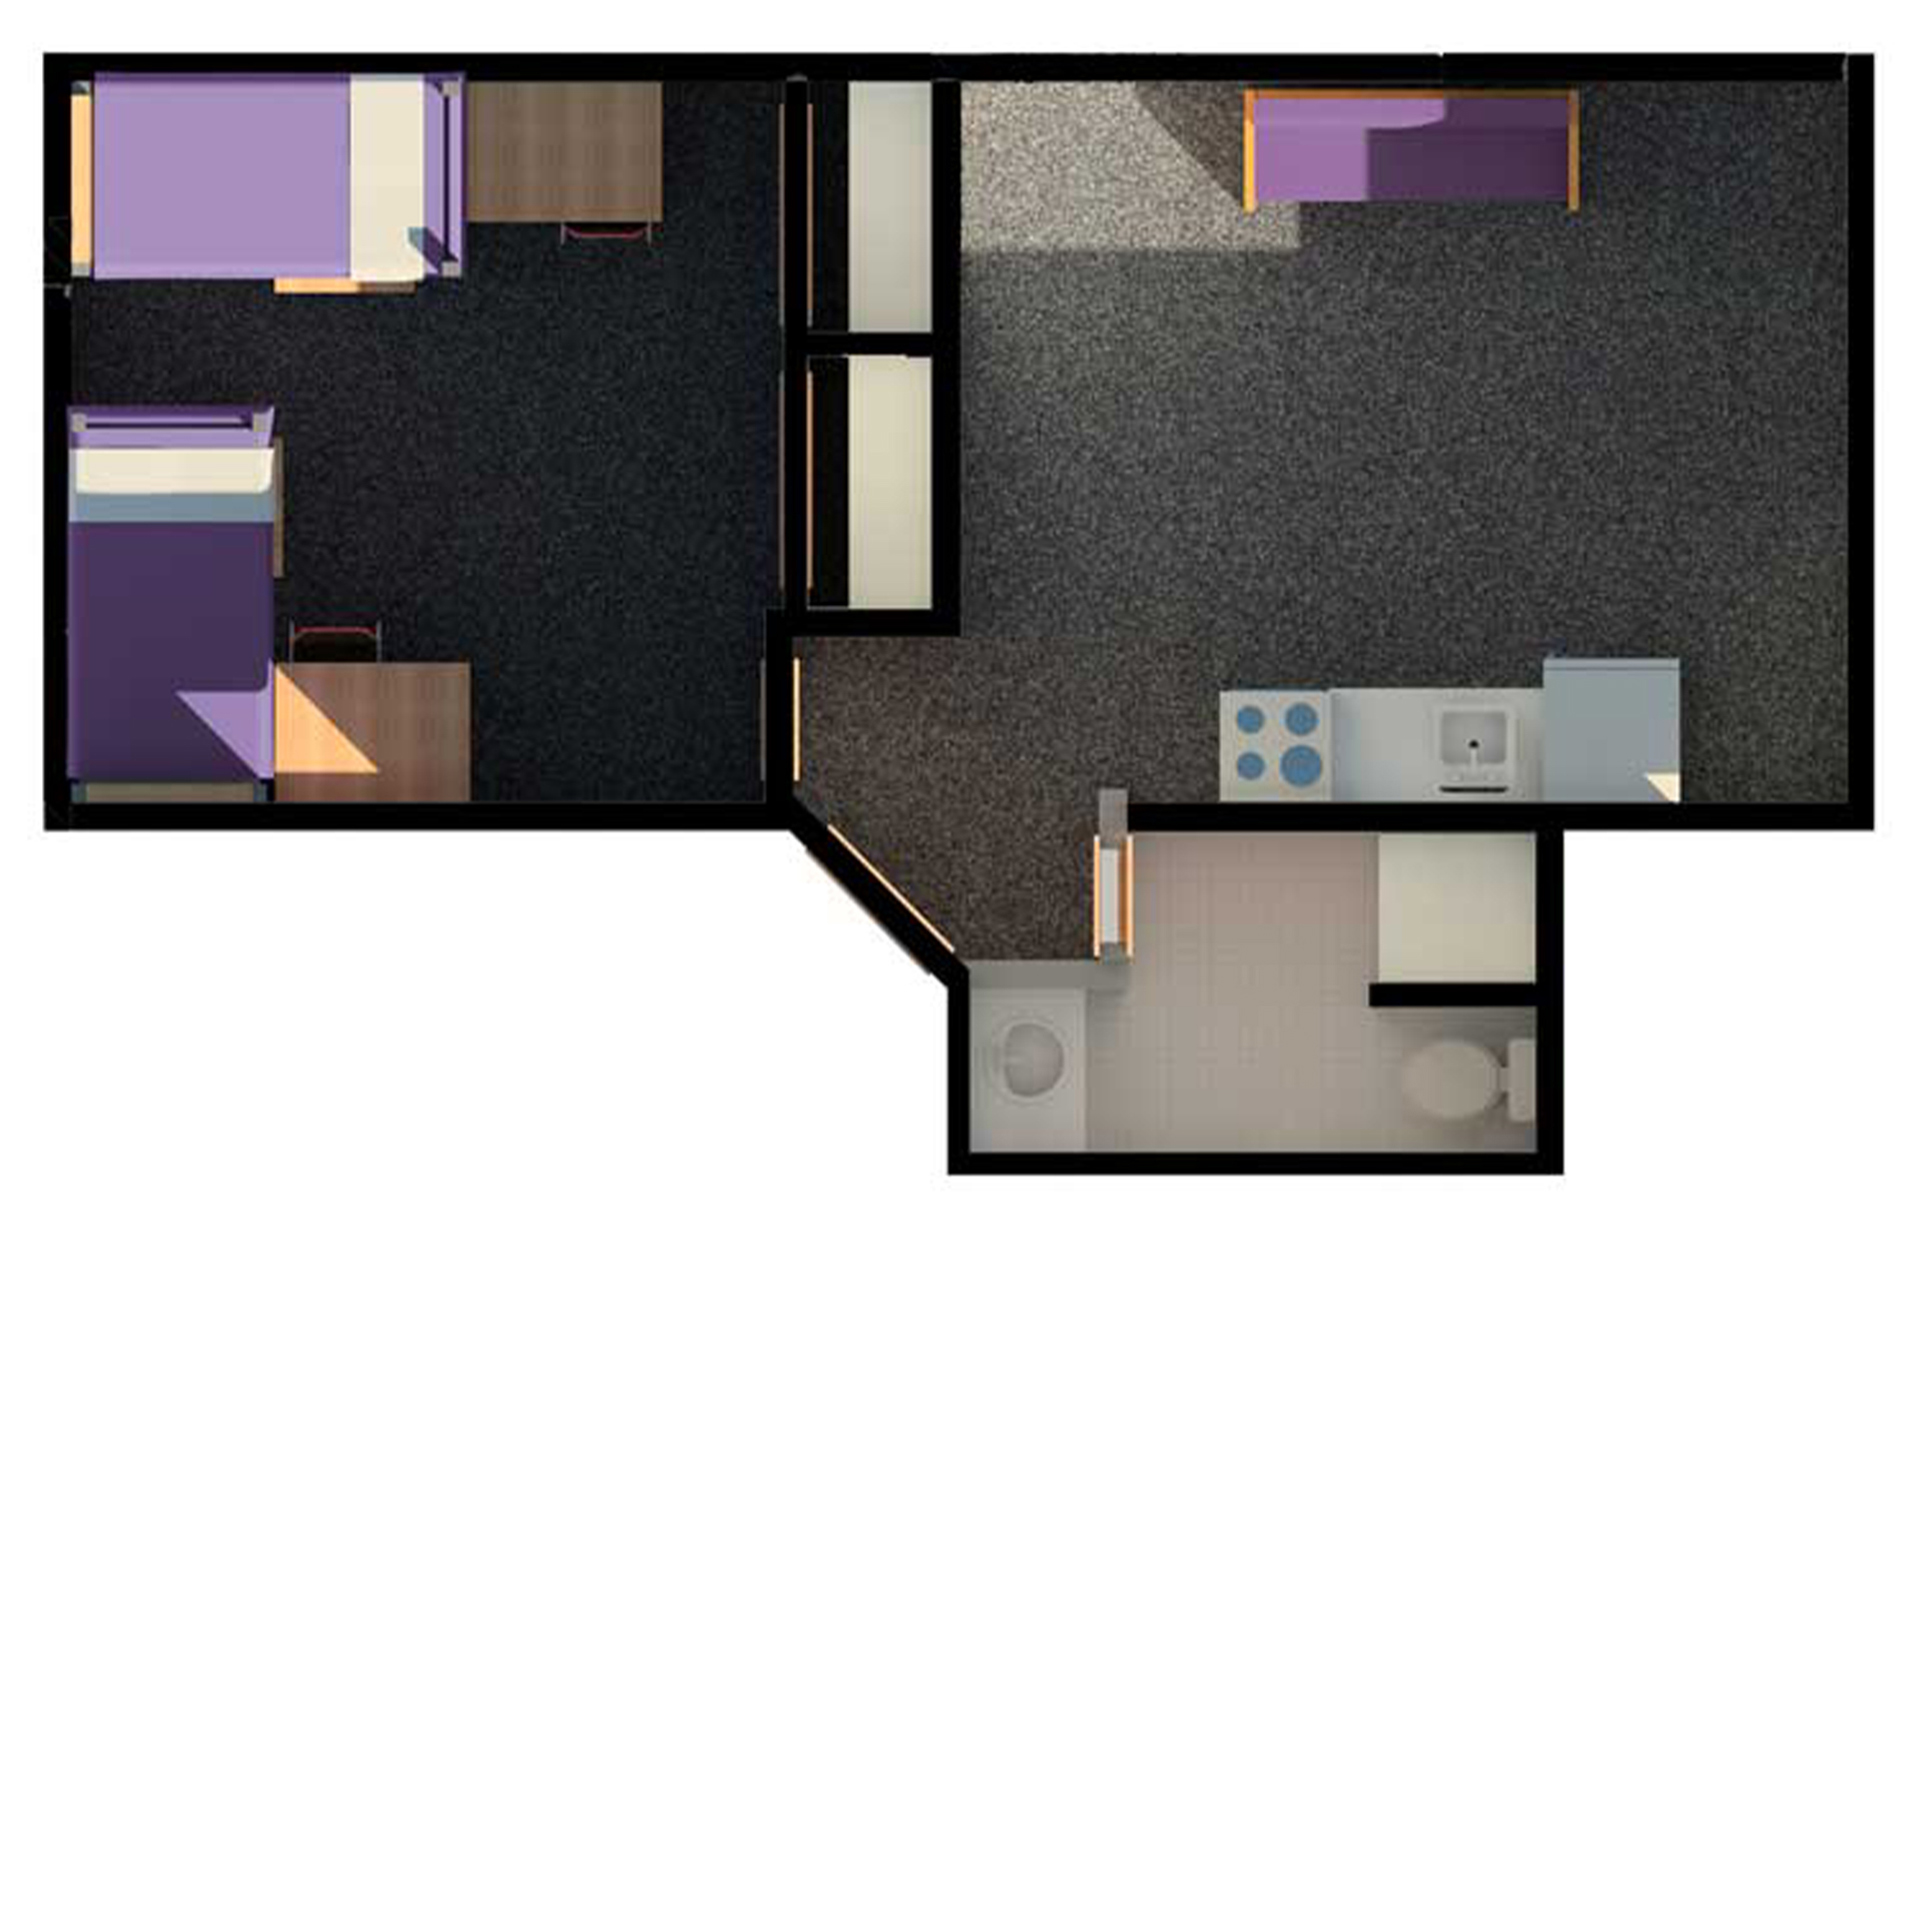 3D overview of room layout